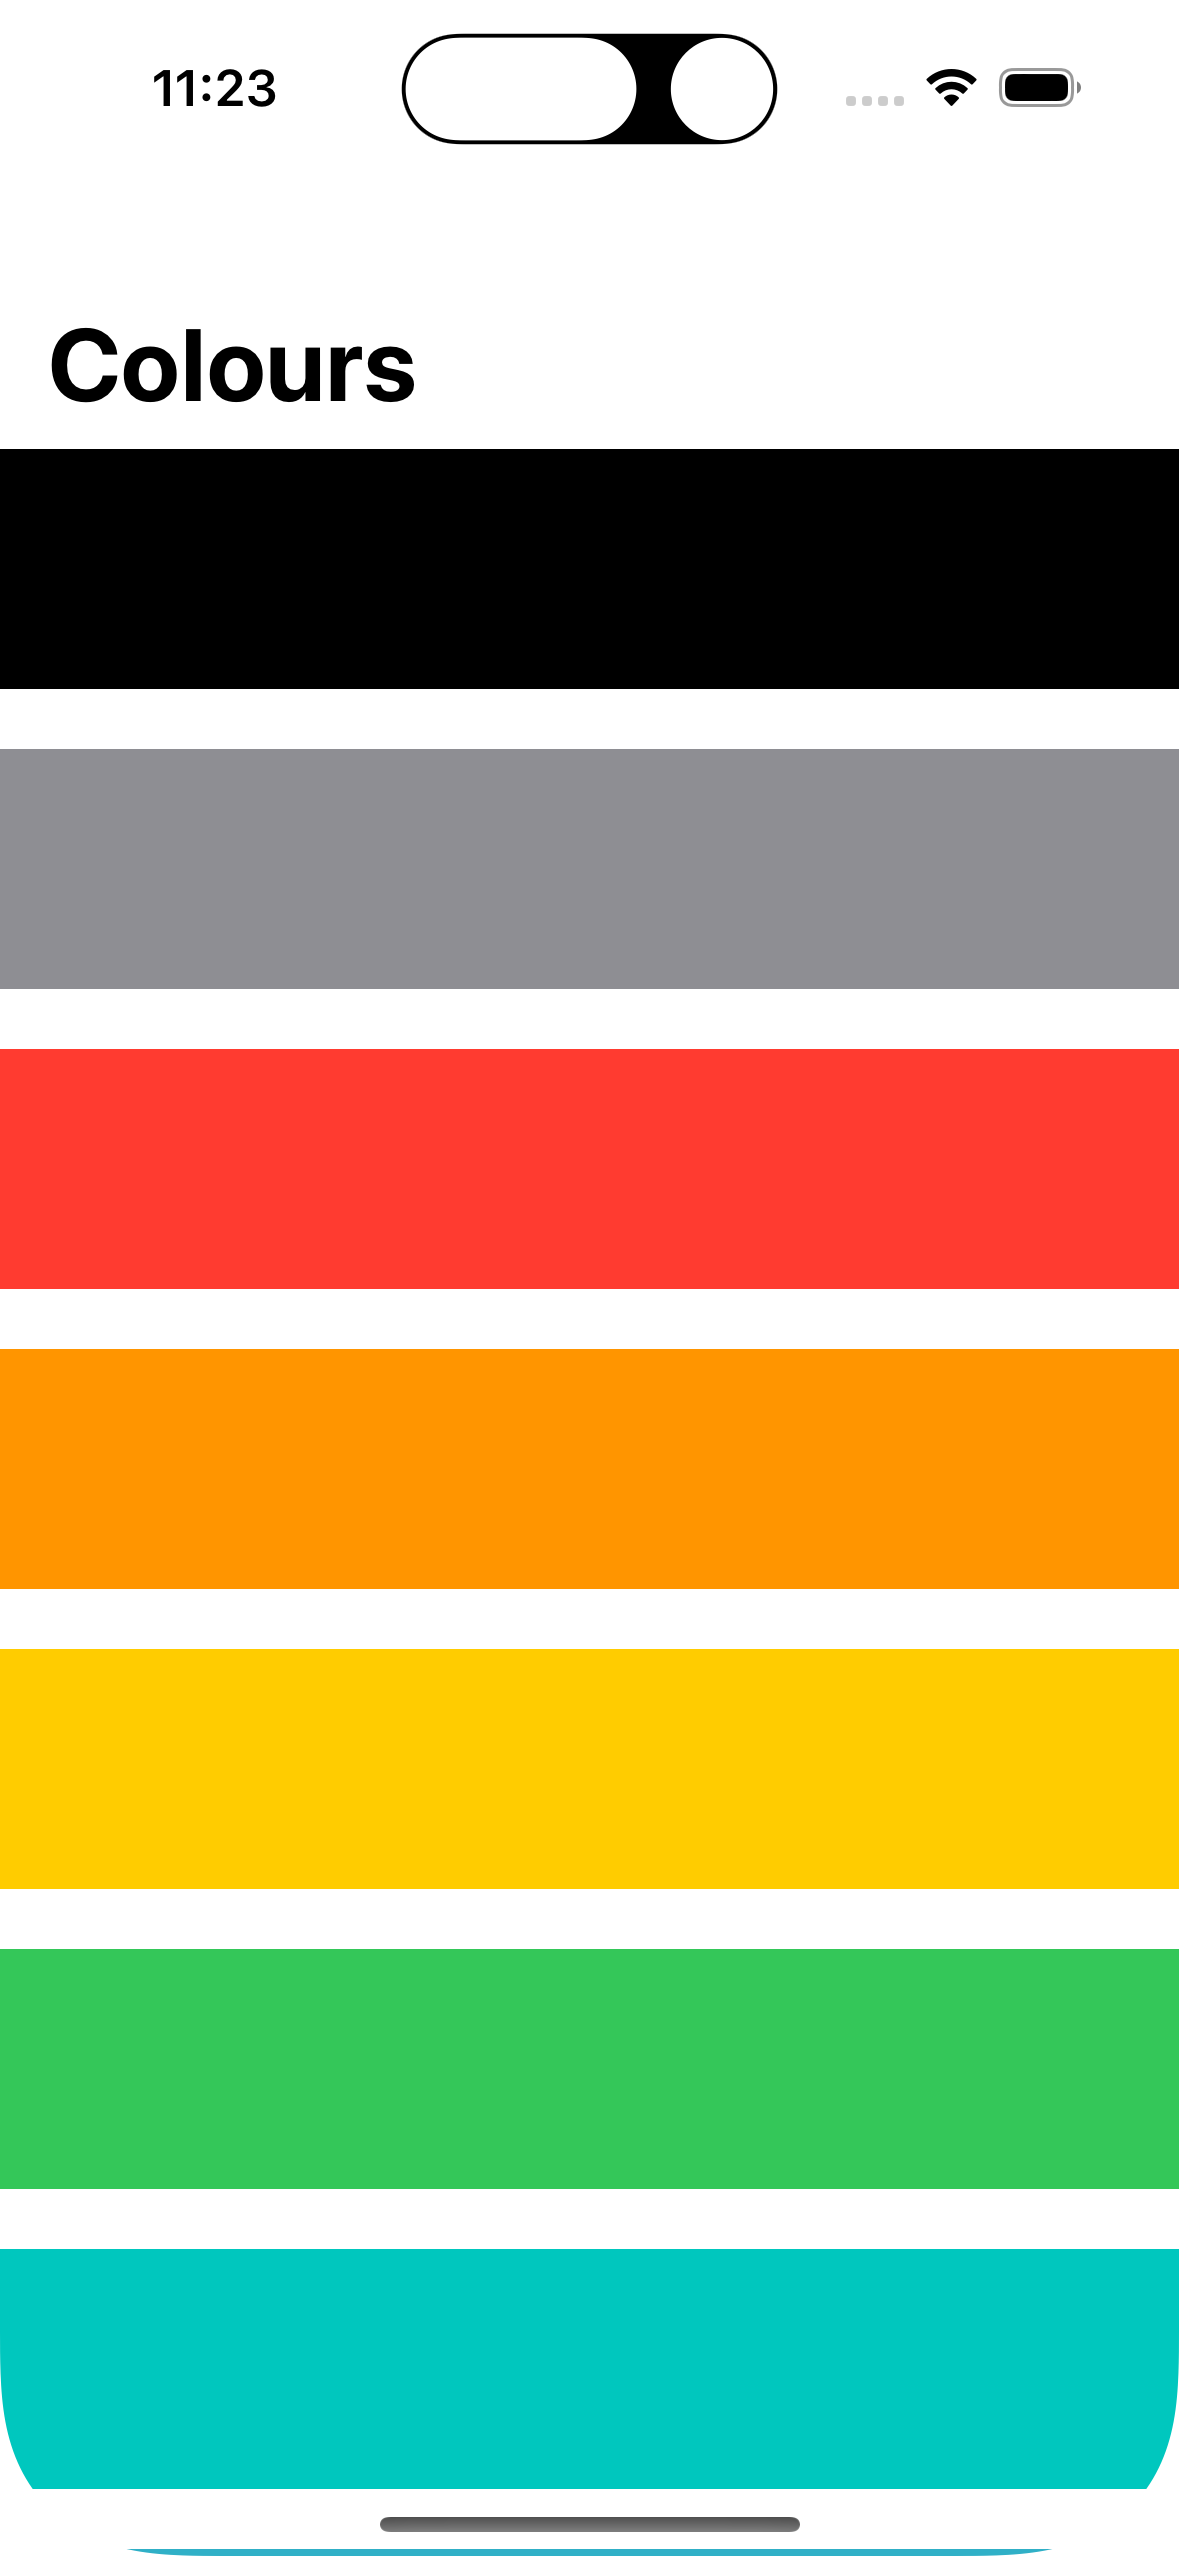 A scrollable list of colours.